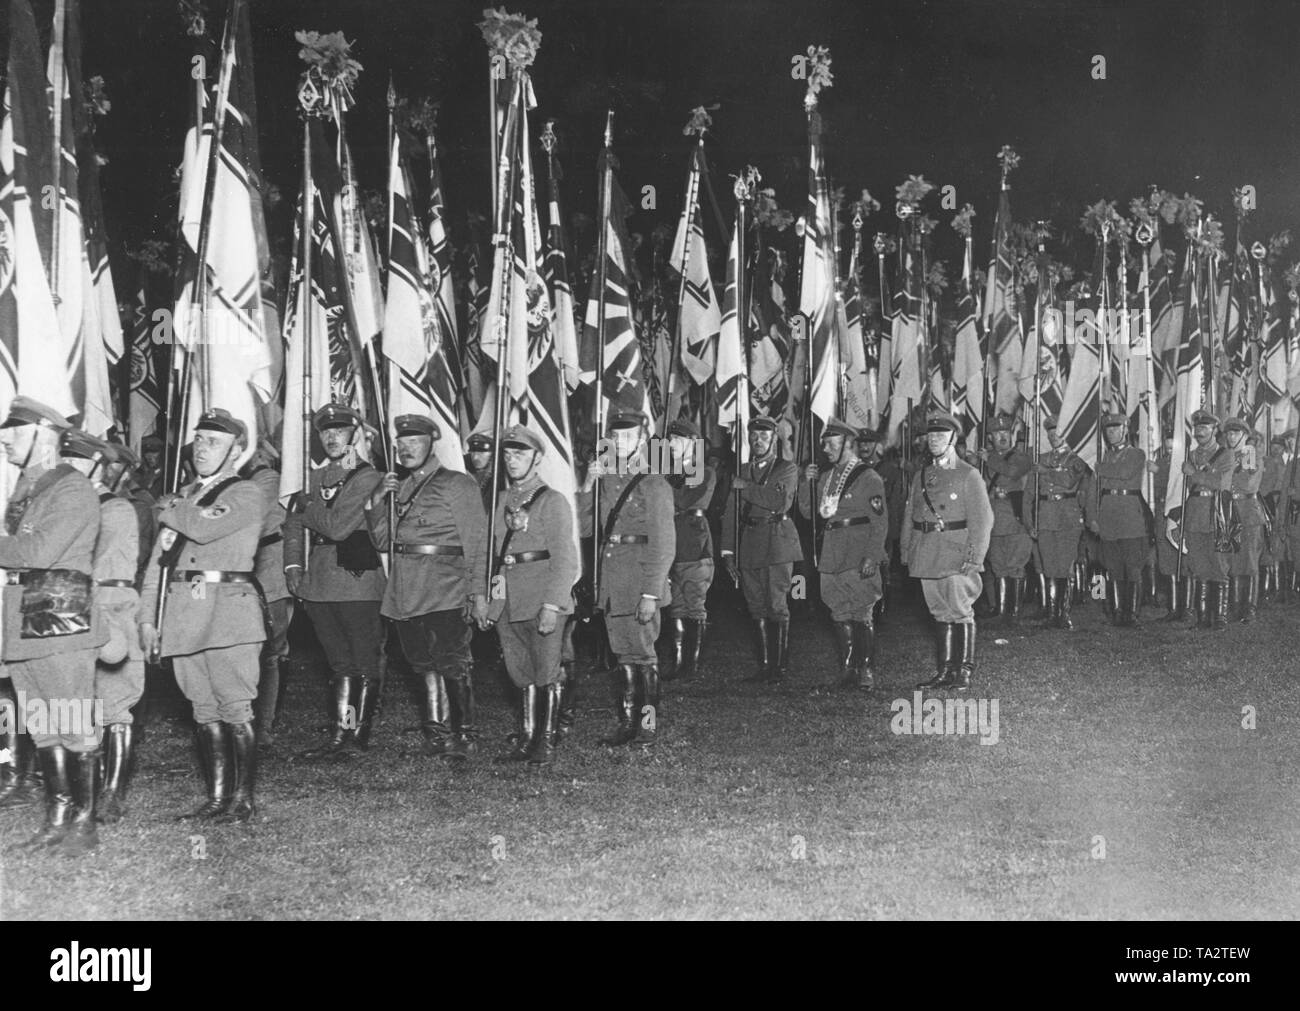 As part of the festival, the flags were also celebrated with a march, the Reichskriegsflagge (imperial war flag) was particularly popular among members of the Stahlhelm. Stock Photo